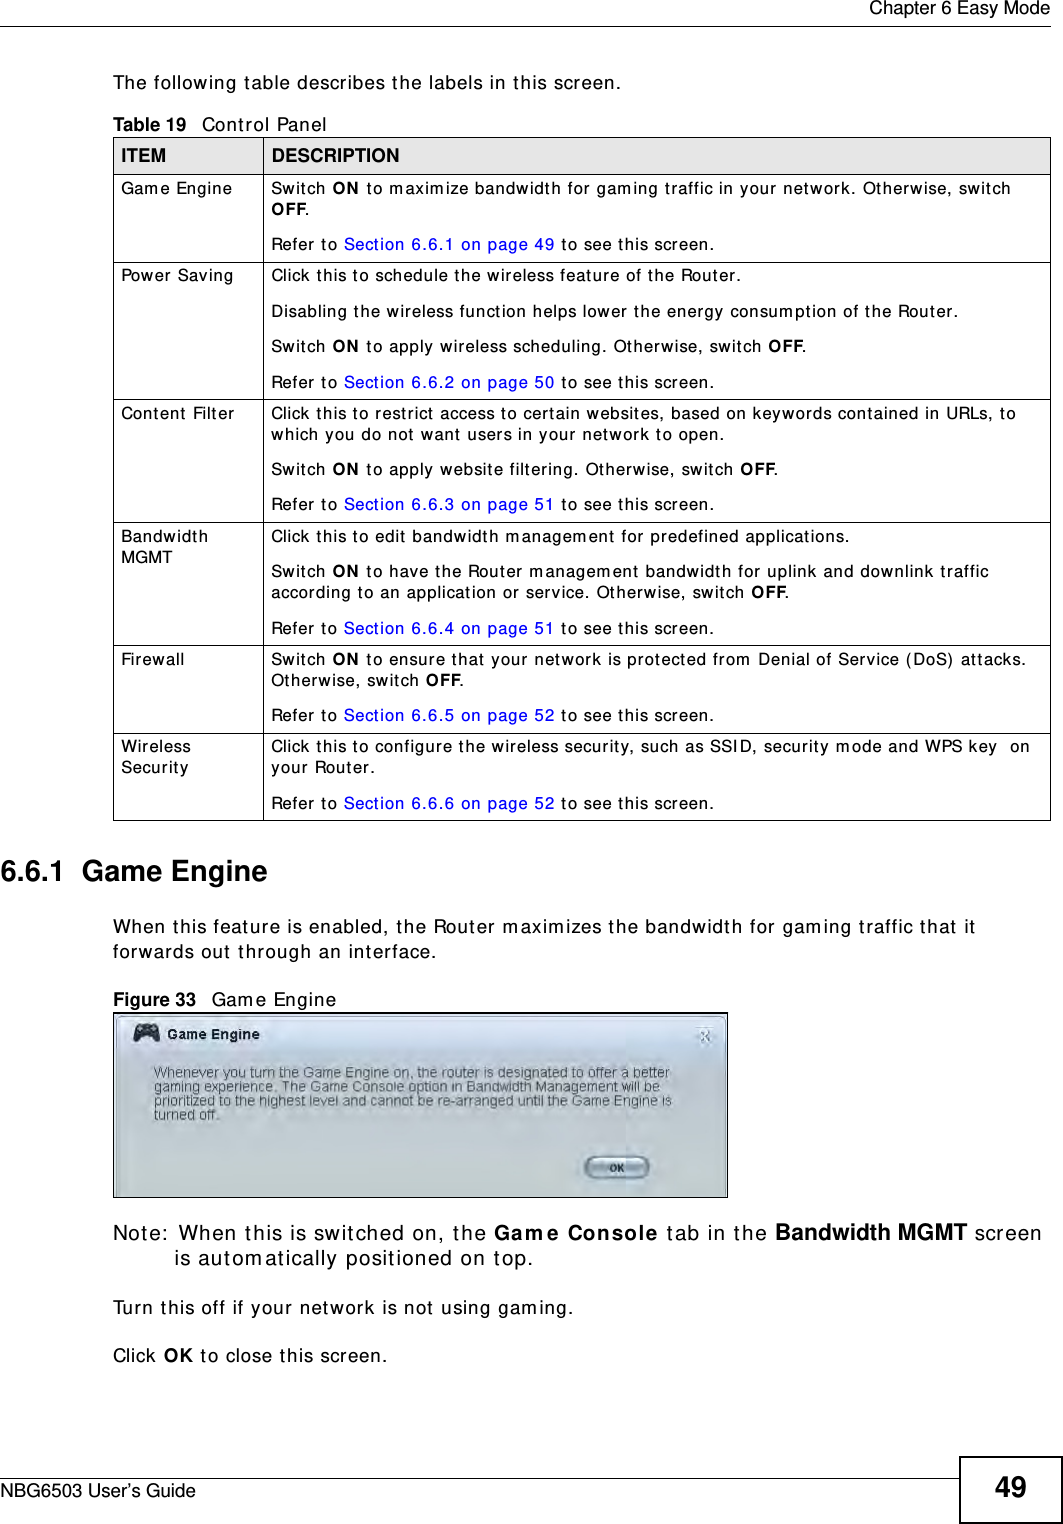  Chapter 6 Easy ModeNBG6503 User’s Guide 49The following table describes the labels in this screen. 6.6.1  Game EngineWhen this feature is enabled, the Router maximizes the bandwidth for gaming traffic that it forwards out through an interface.Figure 33   Game EngineNote: When this is switched on, the Game Console tab in the Bandwidth MGMT screen is automatically positioned on top. Turn this off if your network is not using gaming.Click OK to close this screen.Table 19   Control PanelITEM DESCRIPTIONGame Engine Switch ON to maximize bandwidth for gaming traffic in your network. Otherwise, switch OFF.Refer to Section 6.6.1 on page 49 to see this screen.Power Saving Click this to schedule the wireless feature of the Router. Disabling the wireless function helps lower the energy consumption of the Router. Switch ON to apply wireless scheduling. Otherwise, switch OFF.Refer to Section 6.6.2 on page 50 to see this screen.Content Filter Click this to restrict access to certain websites, based on keywords contained in URLs, to which you do not want users in your network to open. Switch ON to apply website filtering. Otherwise, switch OFF.Refer to Section 6.6.3 on page 51 to see this screen.Bandwidth MGMT Click this to edit bandwidth management for predefined applications. Switch ON to have the Router management bandwidth for uplink and downlink traffic according to an application or service. Otherwise, switch OFF.Refer to Section 6.6.4 on page 51 to see this screen.Firewall Switch ON to ensure that your network is protected from Denial of Service (DoS) attacks. Otherwise, switch OFF.Refer to Section 6.6.5 on page 52 to see this screen.Wireless Security Click this to configure the wireless security, such as SSID, security mode and WPS key  on your Router.  Refer to Section 6.6.6 on page 52 to see this screen.